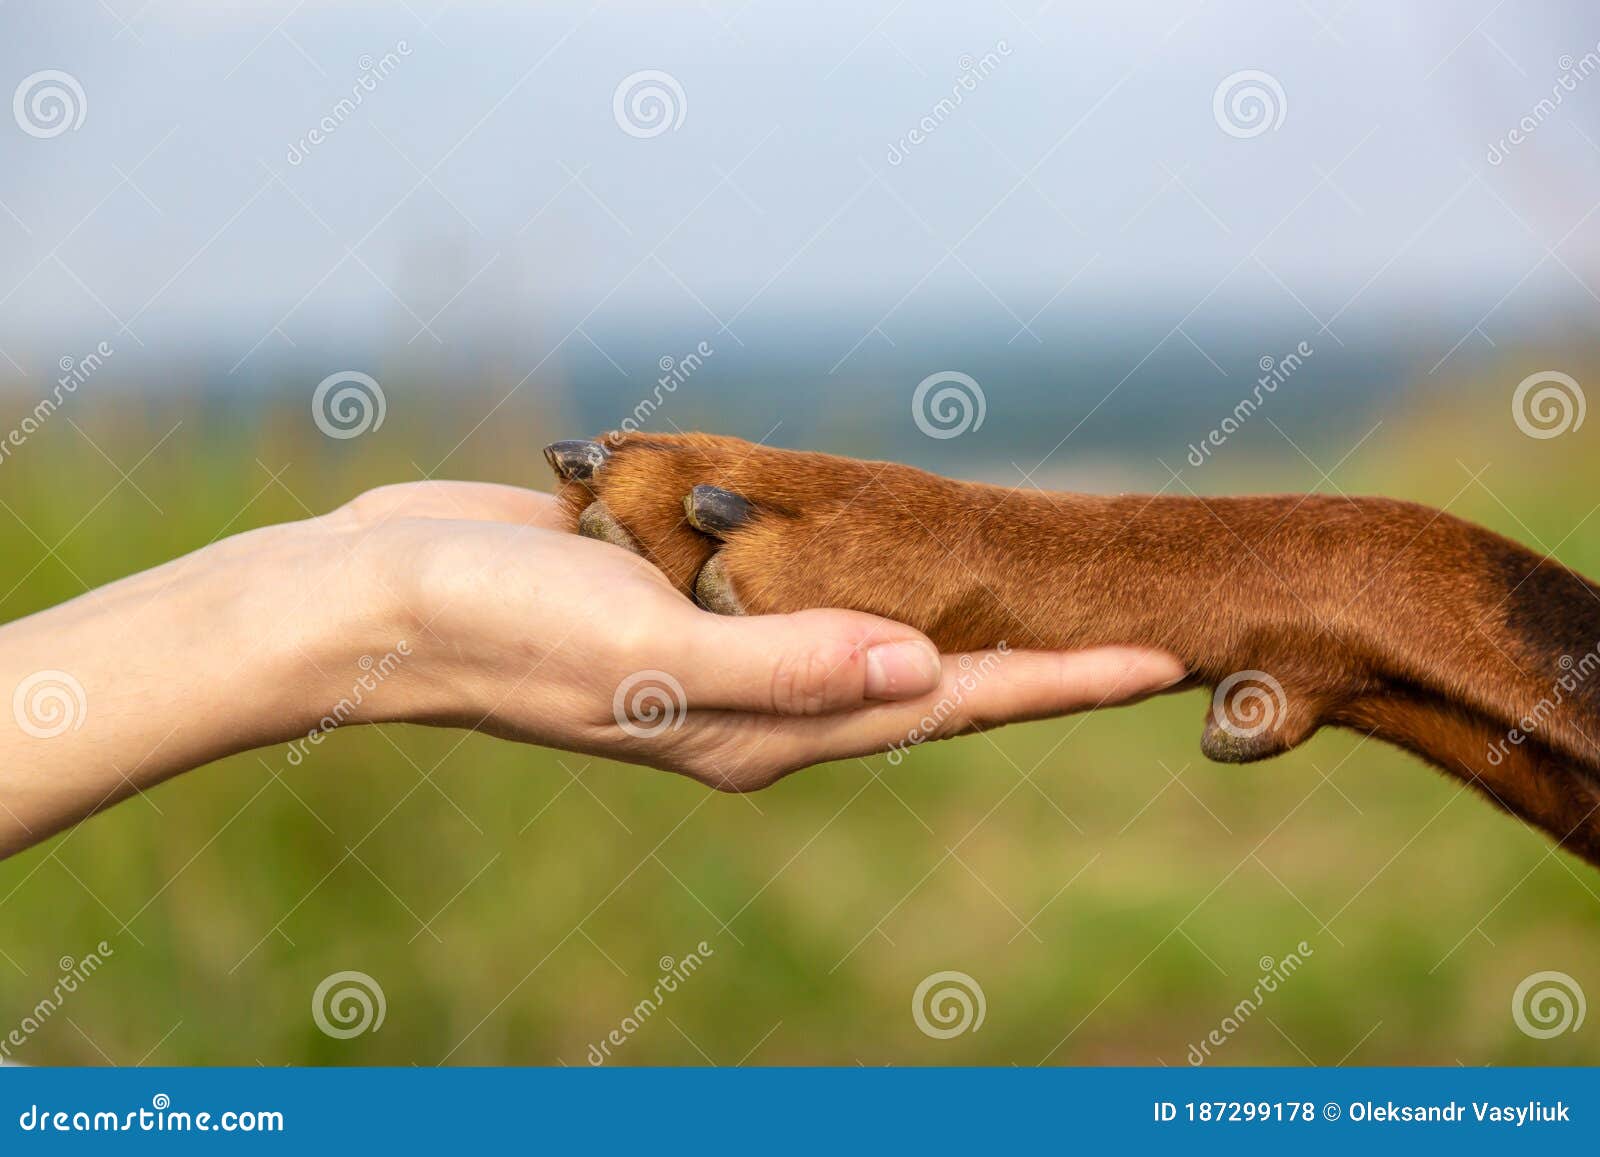 Dobermann Dog Paw in the Palm of a Human Hand Close-up on a Blurred Field Background. Horizontal Orientation. Photo - Image of dobermann, friendship: 187299178